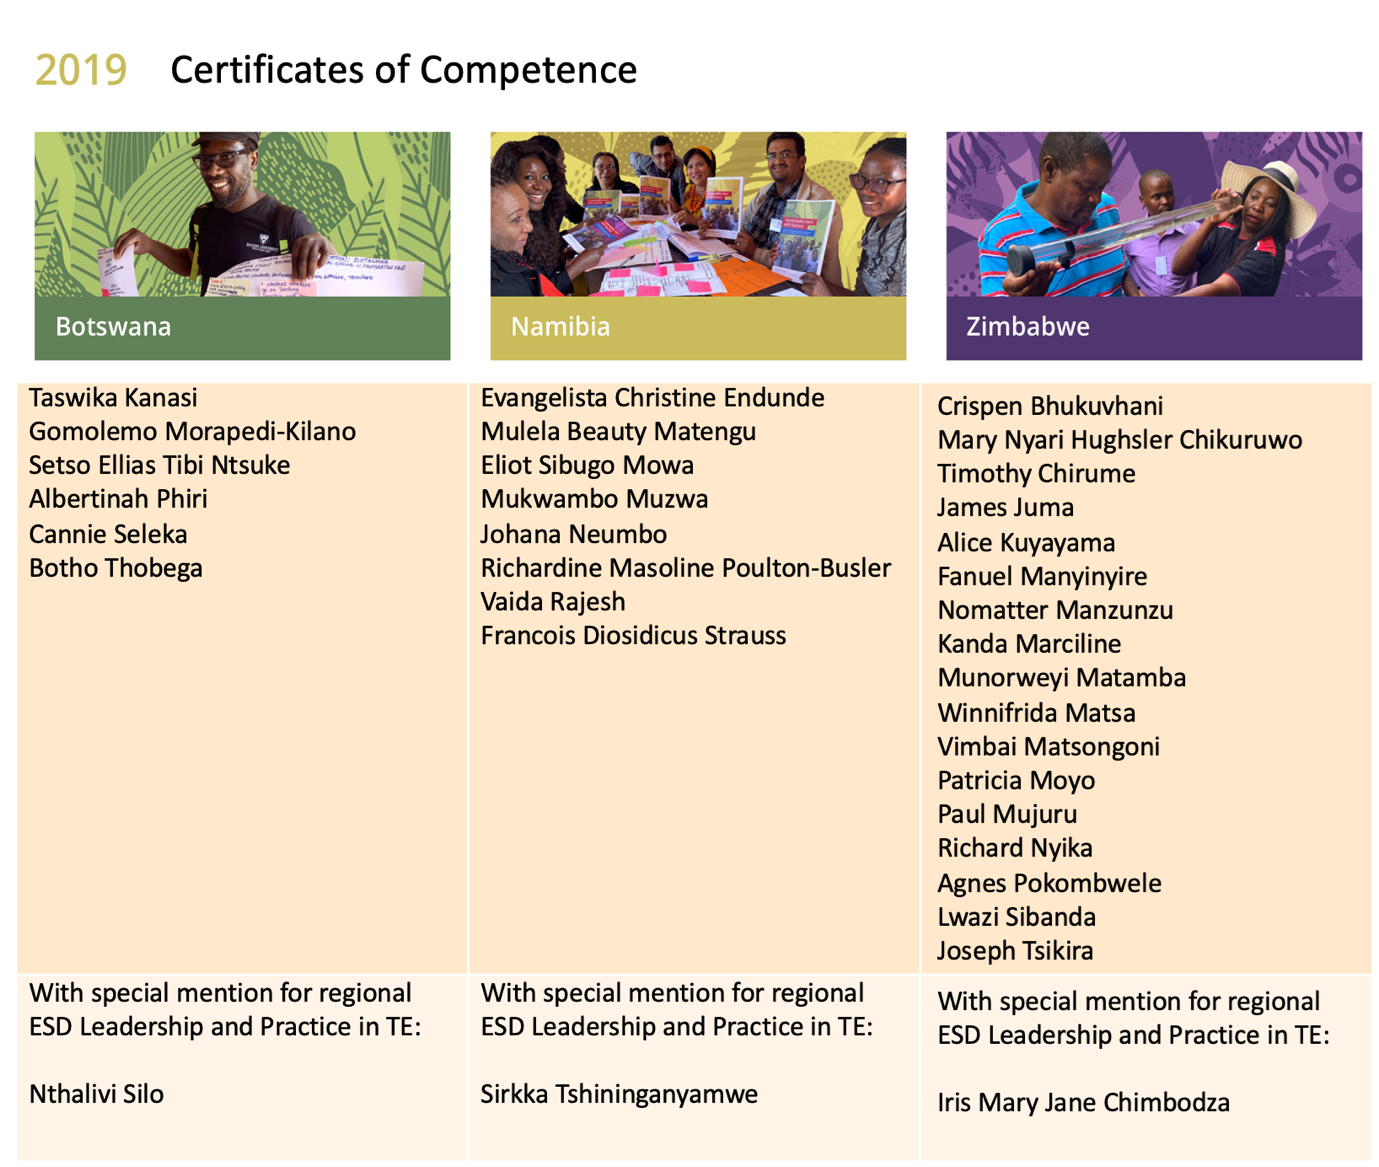 2019 Certificates of Competence